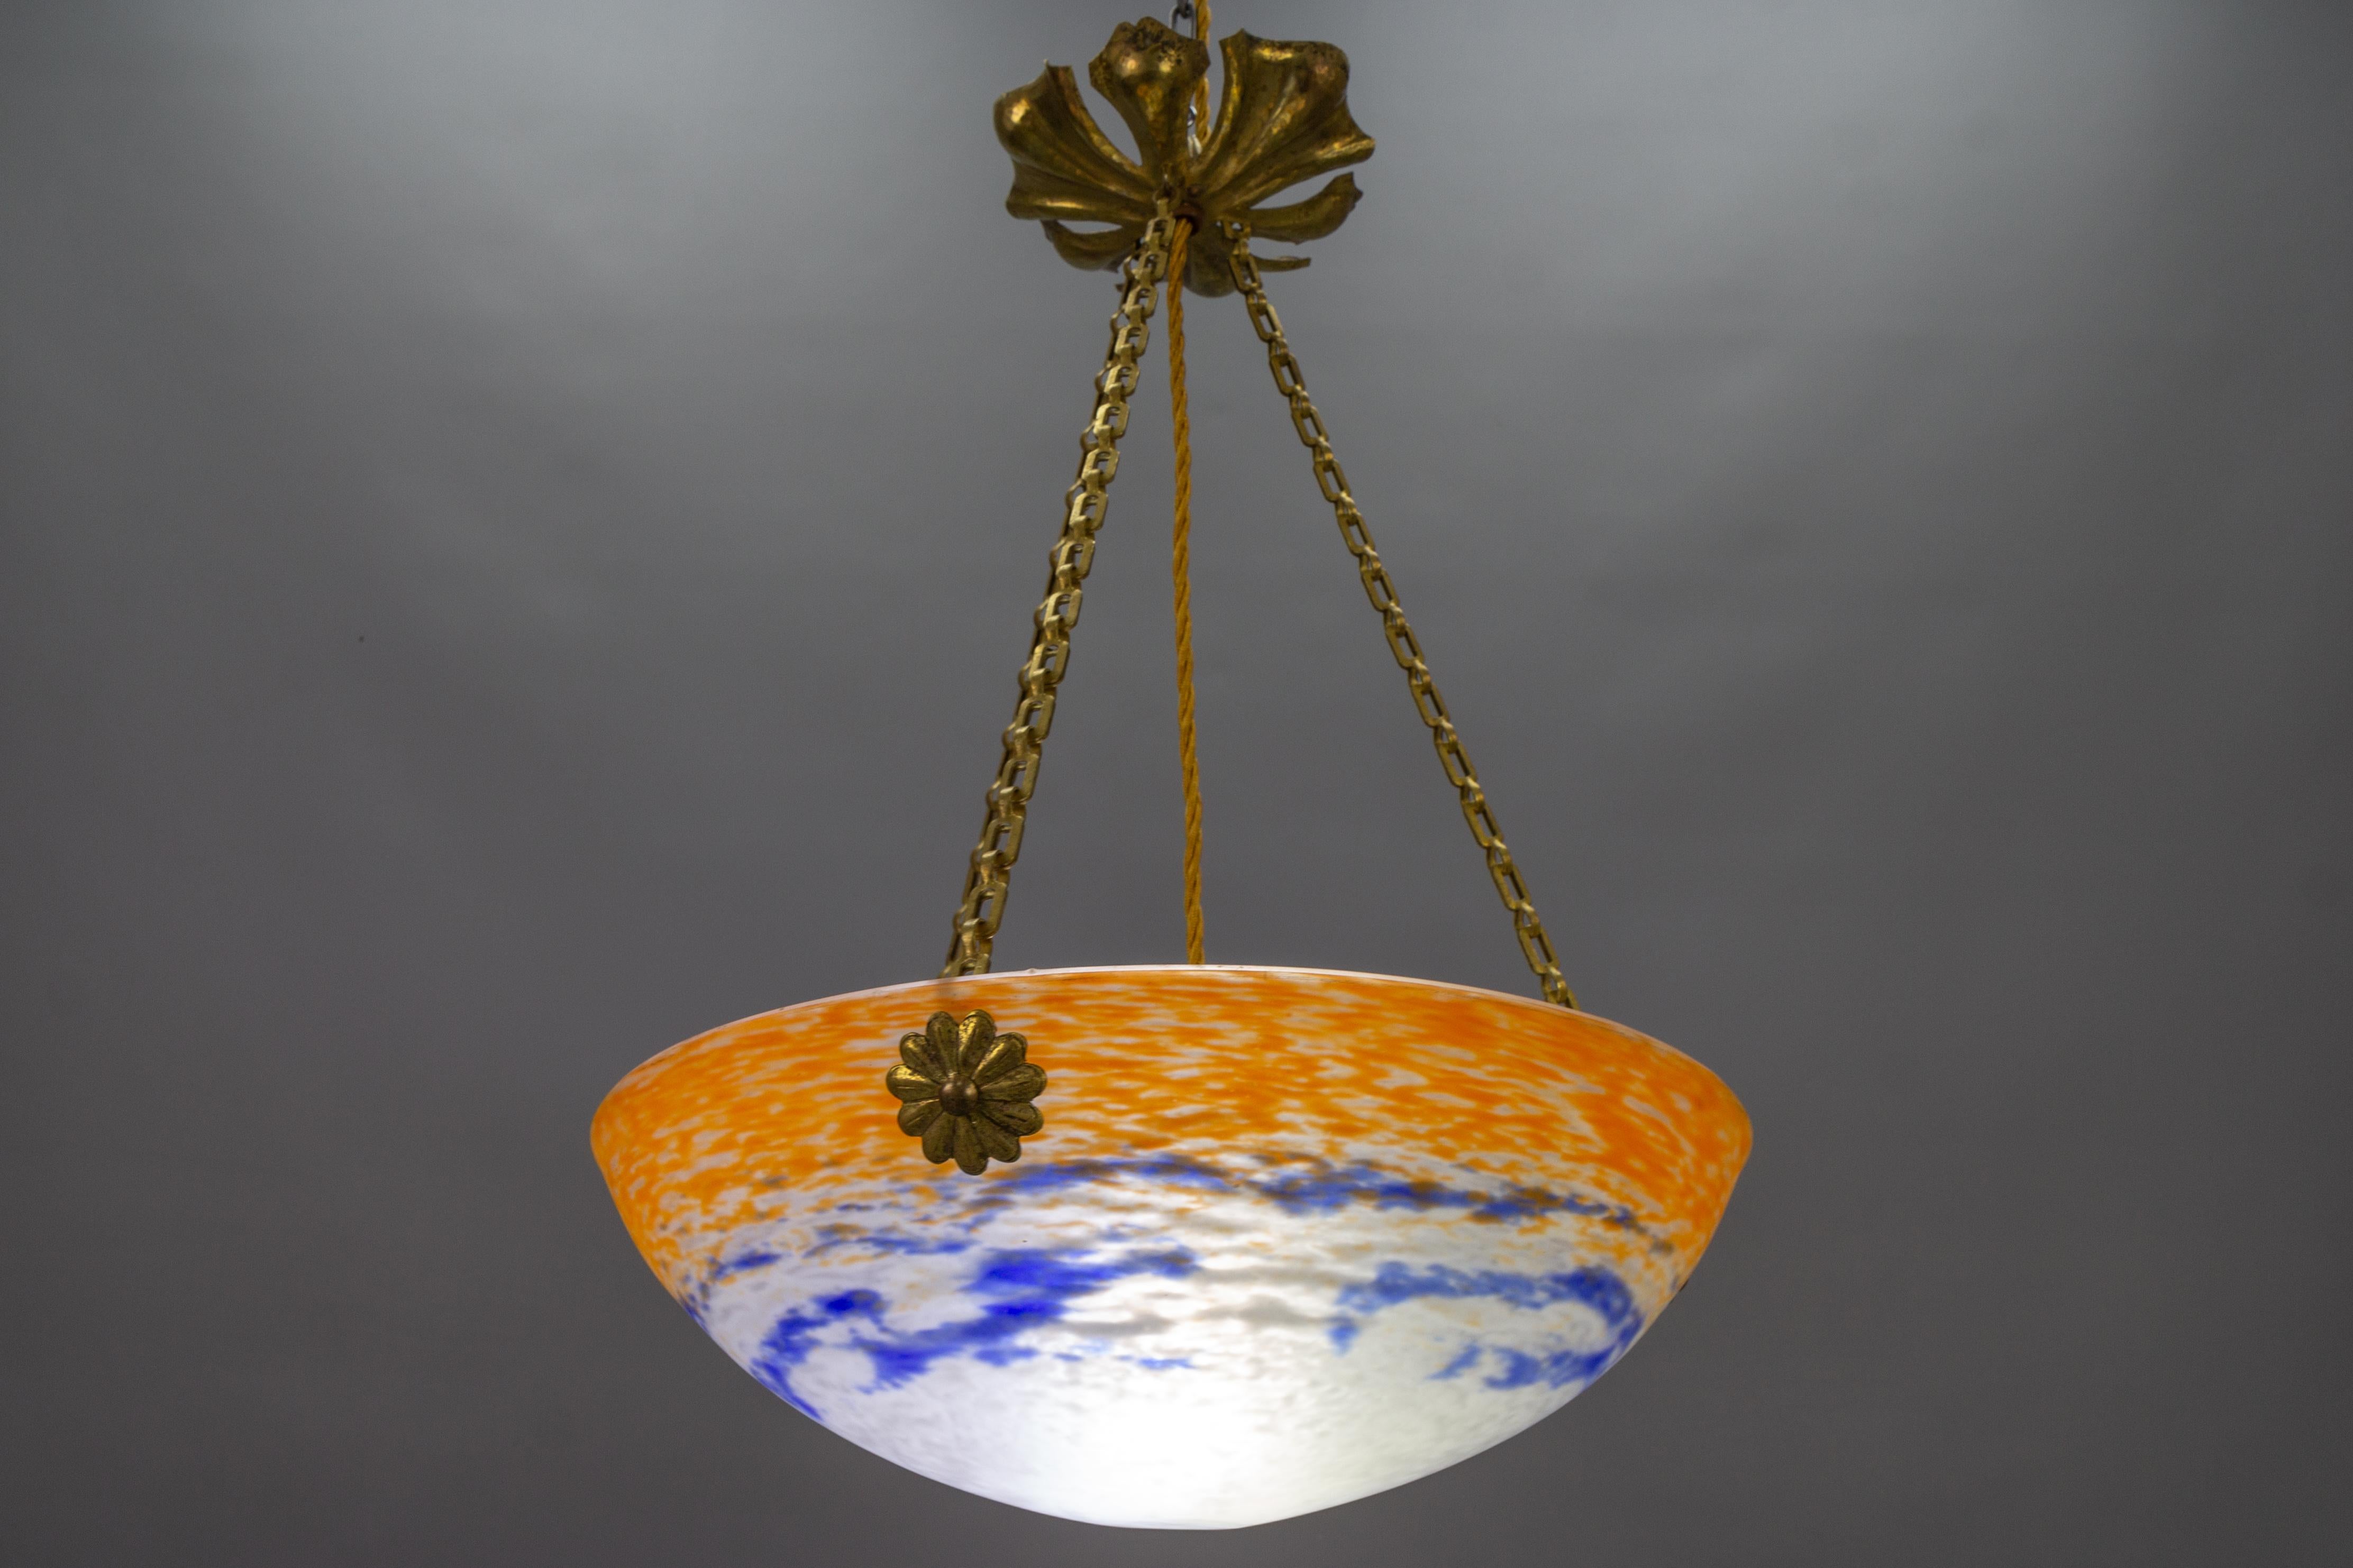 French Art Nouveau Orange, White and Blue Glass Pendant Light by Noverdy, 1920s For Sale 2